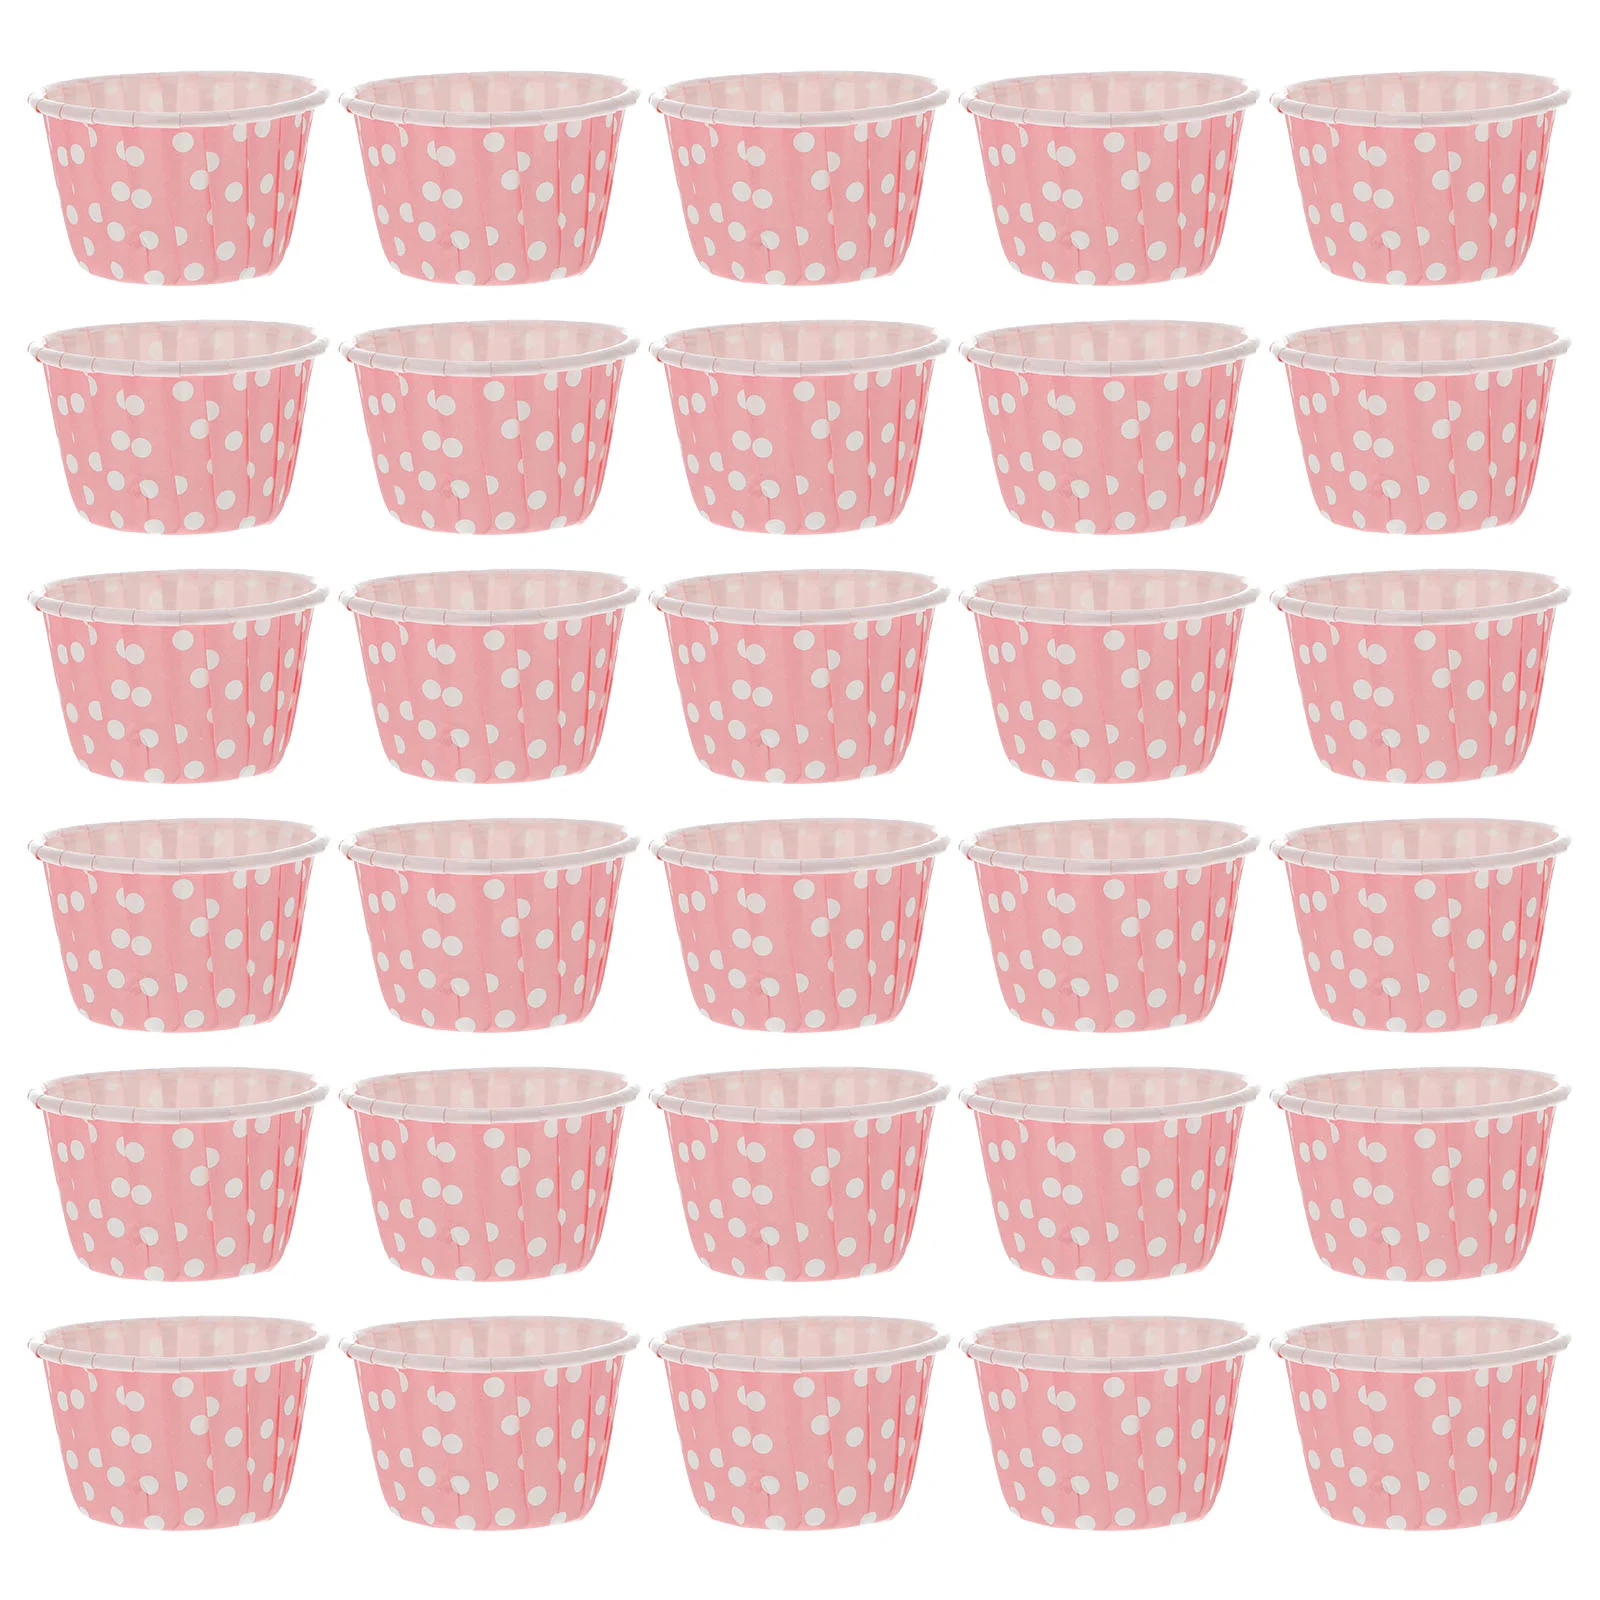 

Cups Paper Cup Bowls Ice Cream Dessert Disposable Sundae Yogurt Bowl Cupcake Pudding Container Jelly Muffin Cases Soup Liners